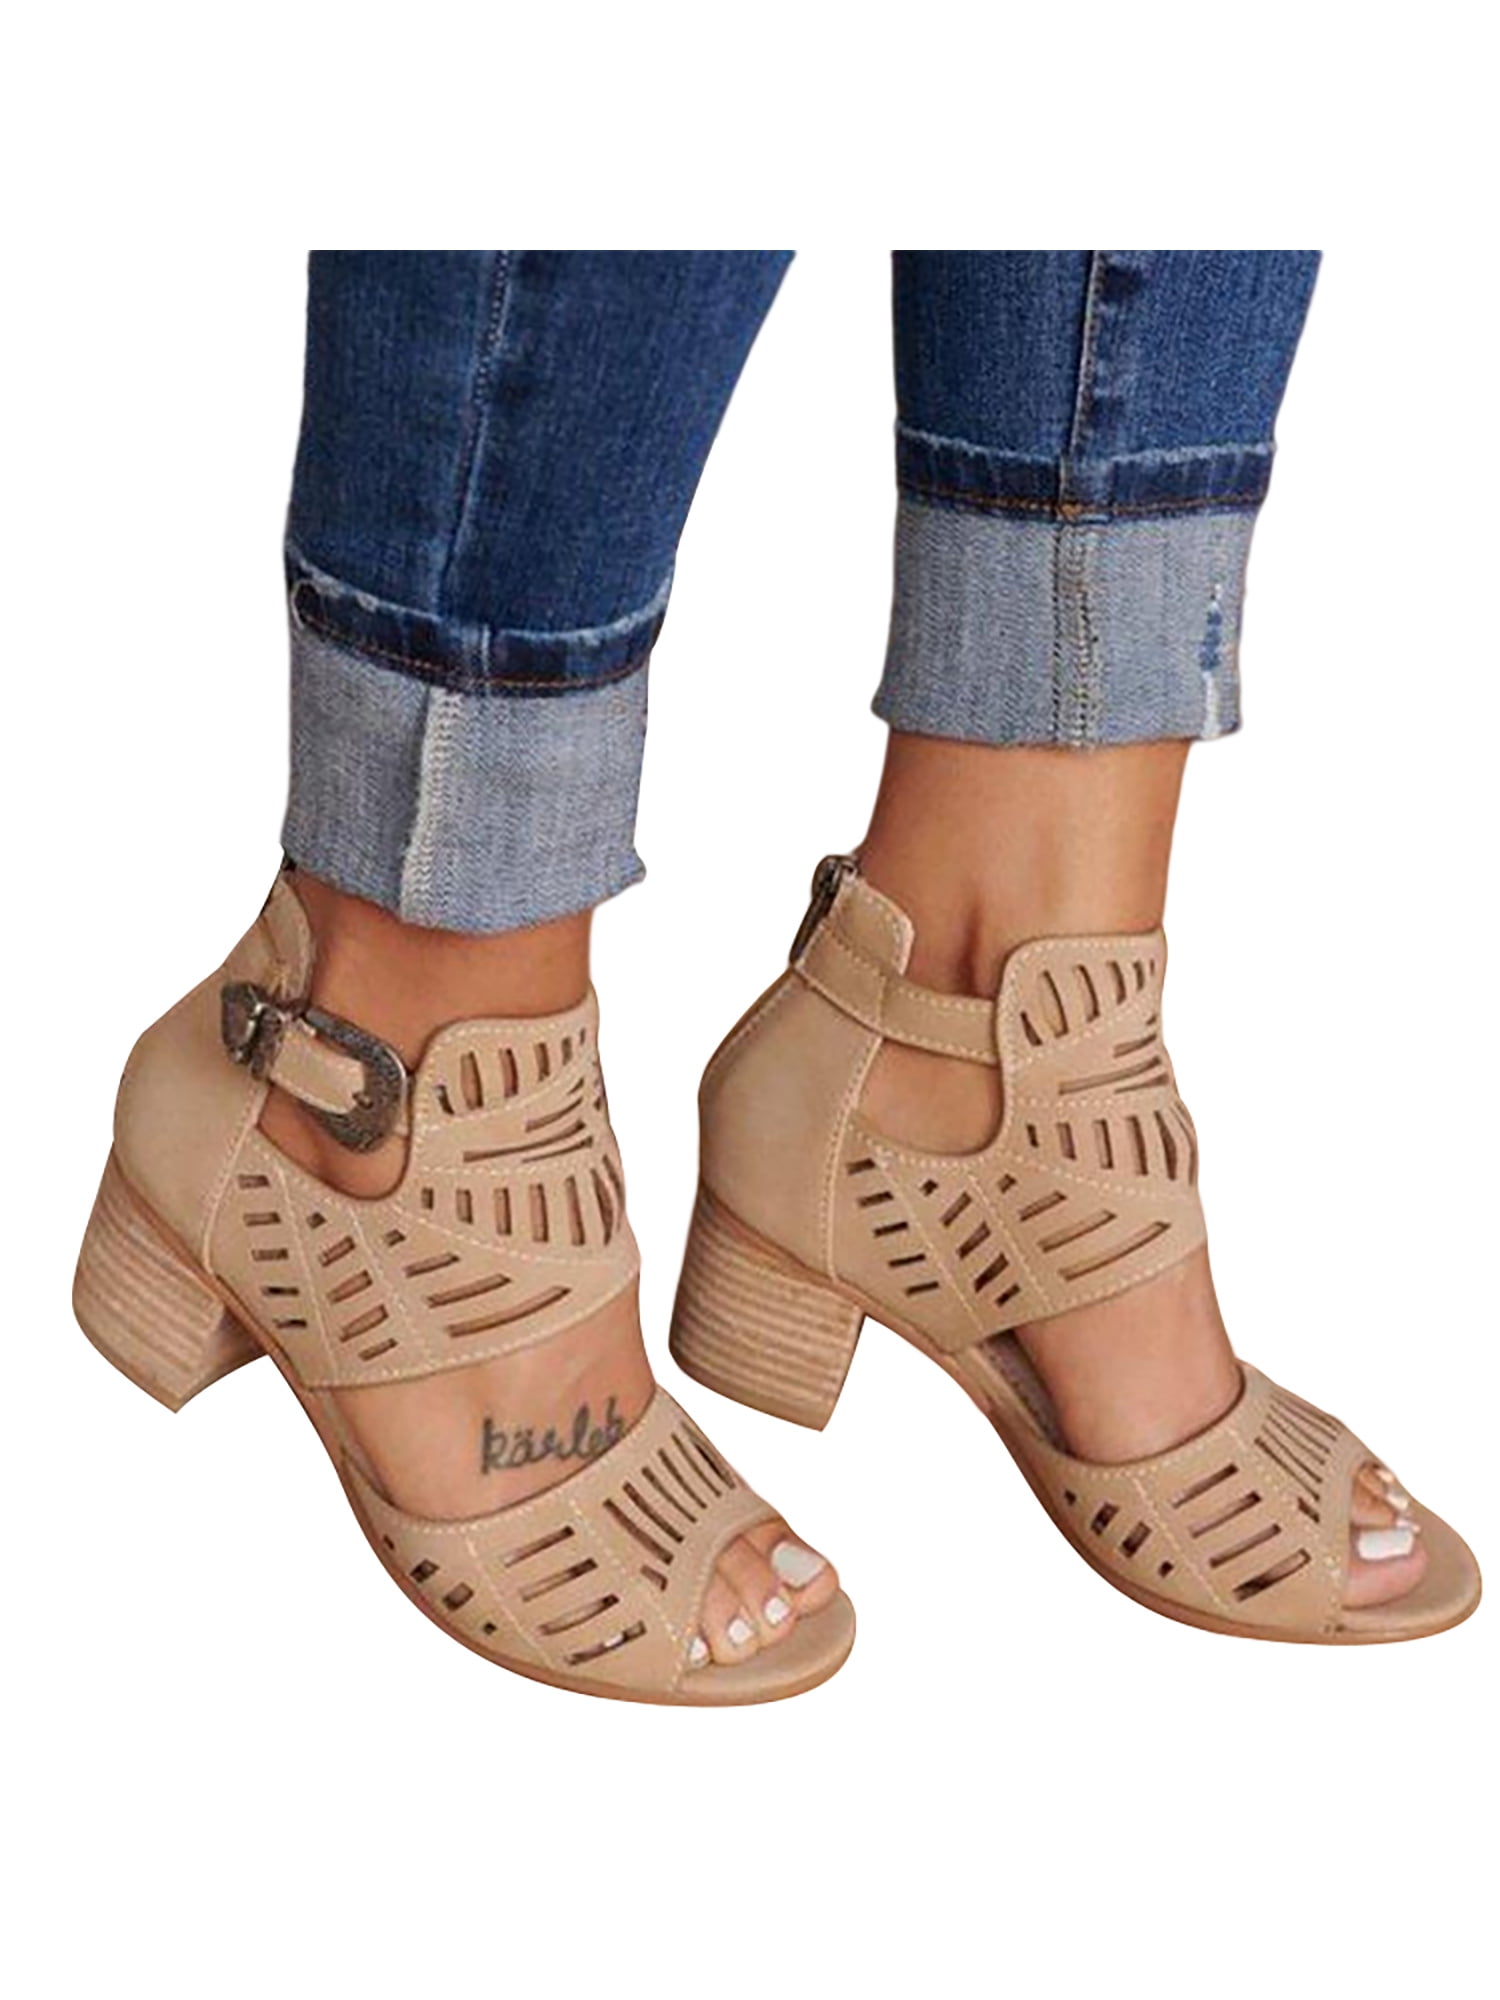 Gladiator Roman Women's High Heels Sandals Chunky Faux Suede Summer Party Shoes 